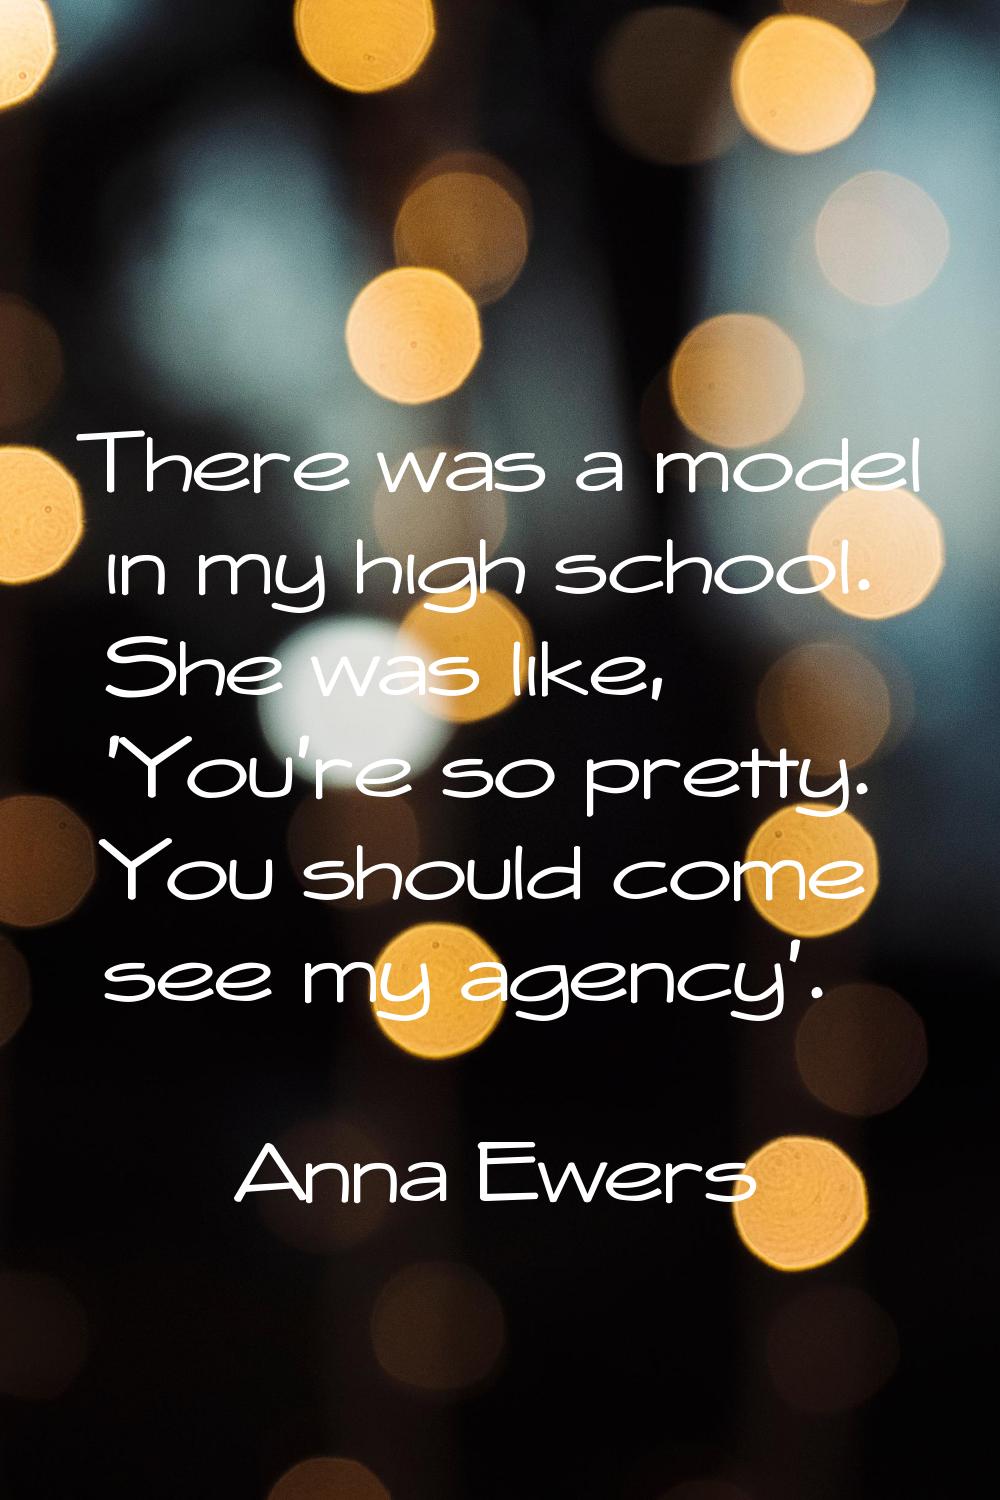 There was a model in my high school. She was like, 'You're so pretty. You should come see my agency